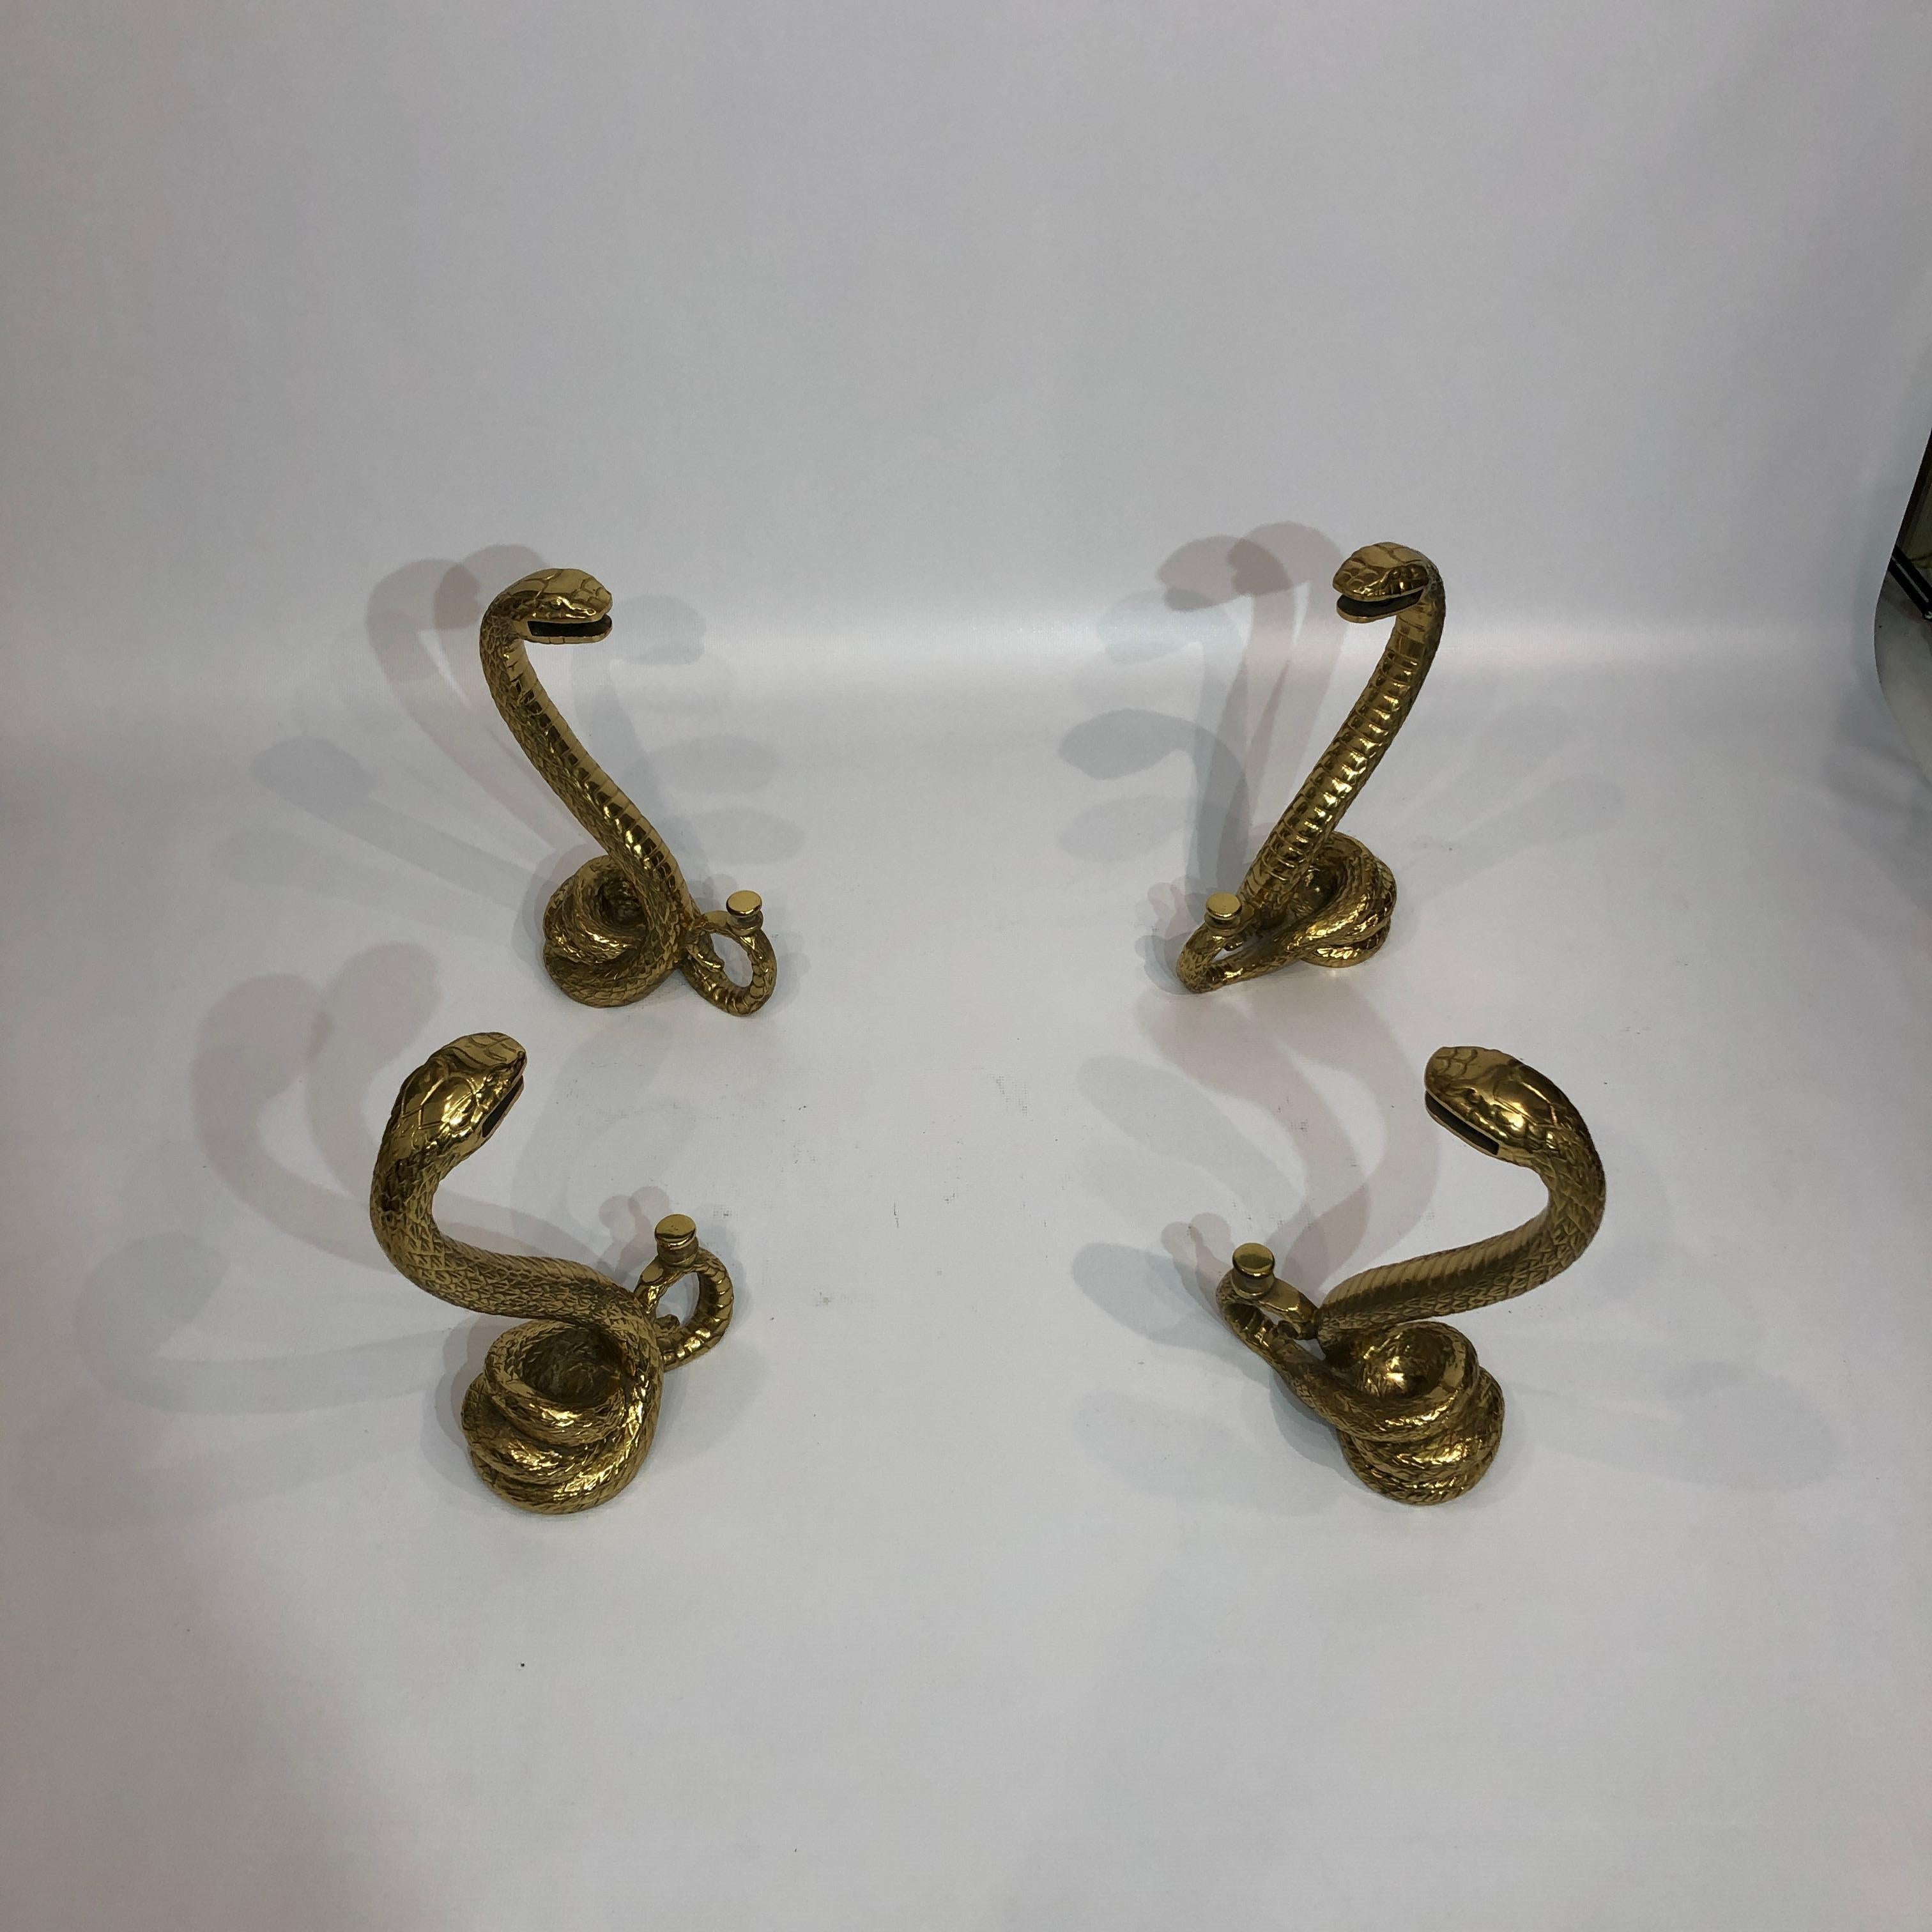 This coffee table, very much in the manner of French designer Alain Chervet, consists of four individual brass snakes. Delicately moulded, the snakes are designed to hold two panes of glass –– one smaller sheet towards the bottom, and then one